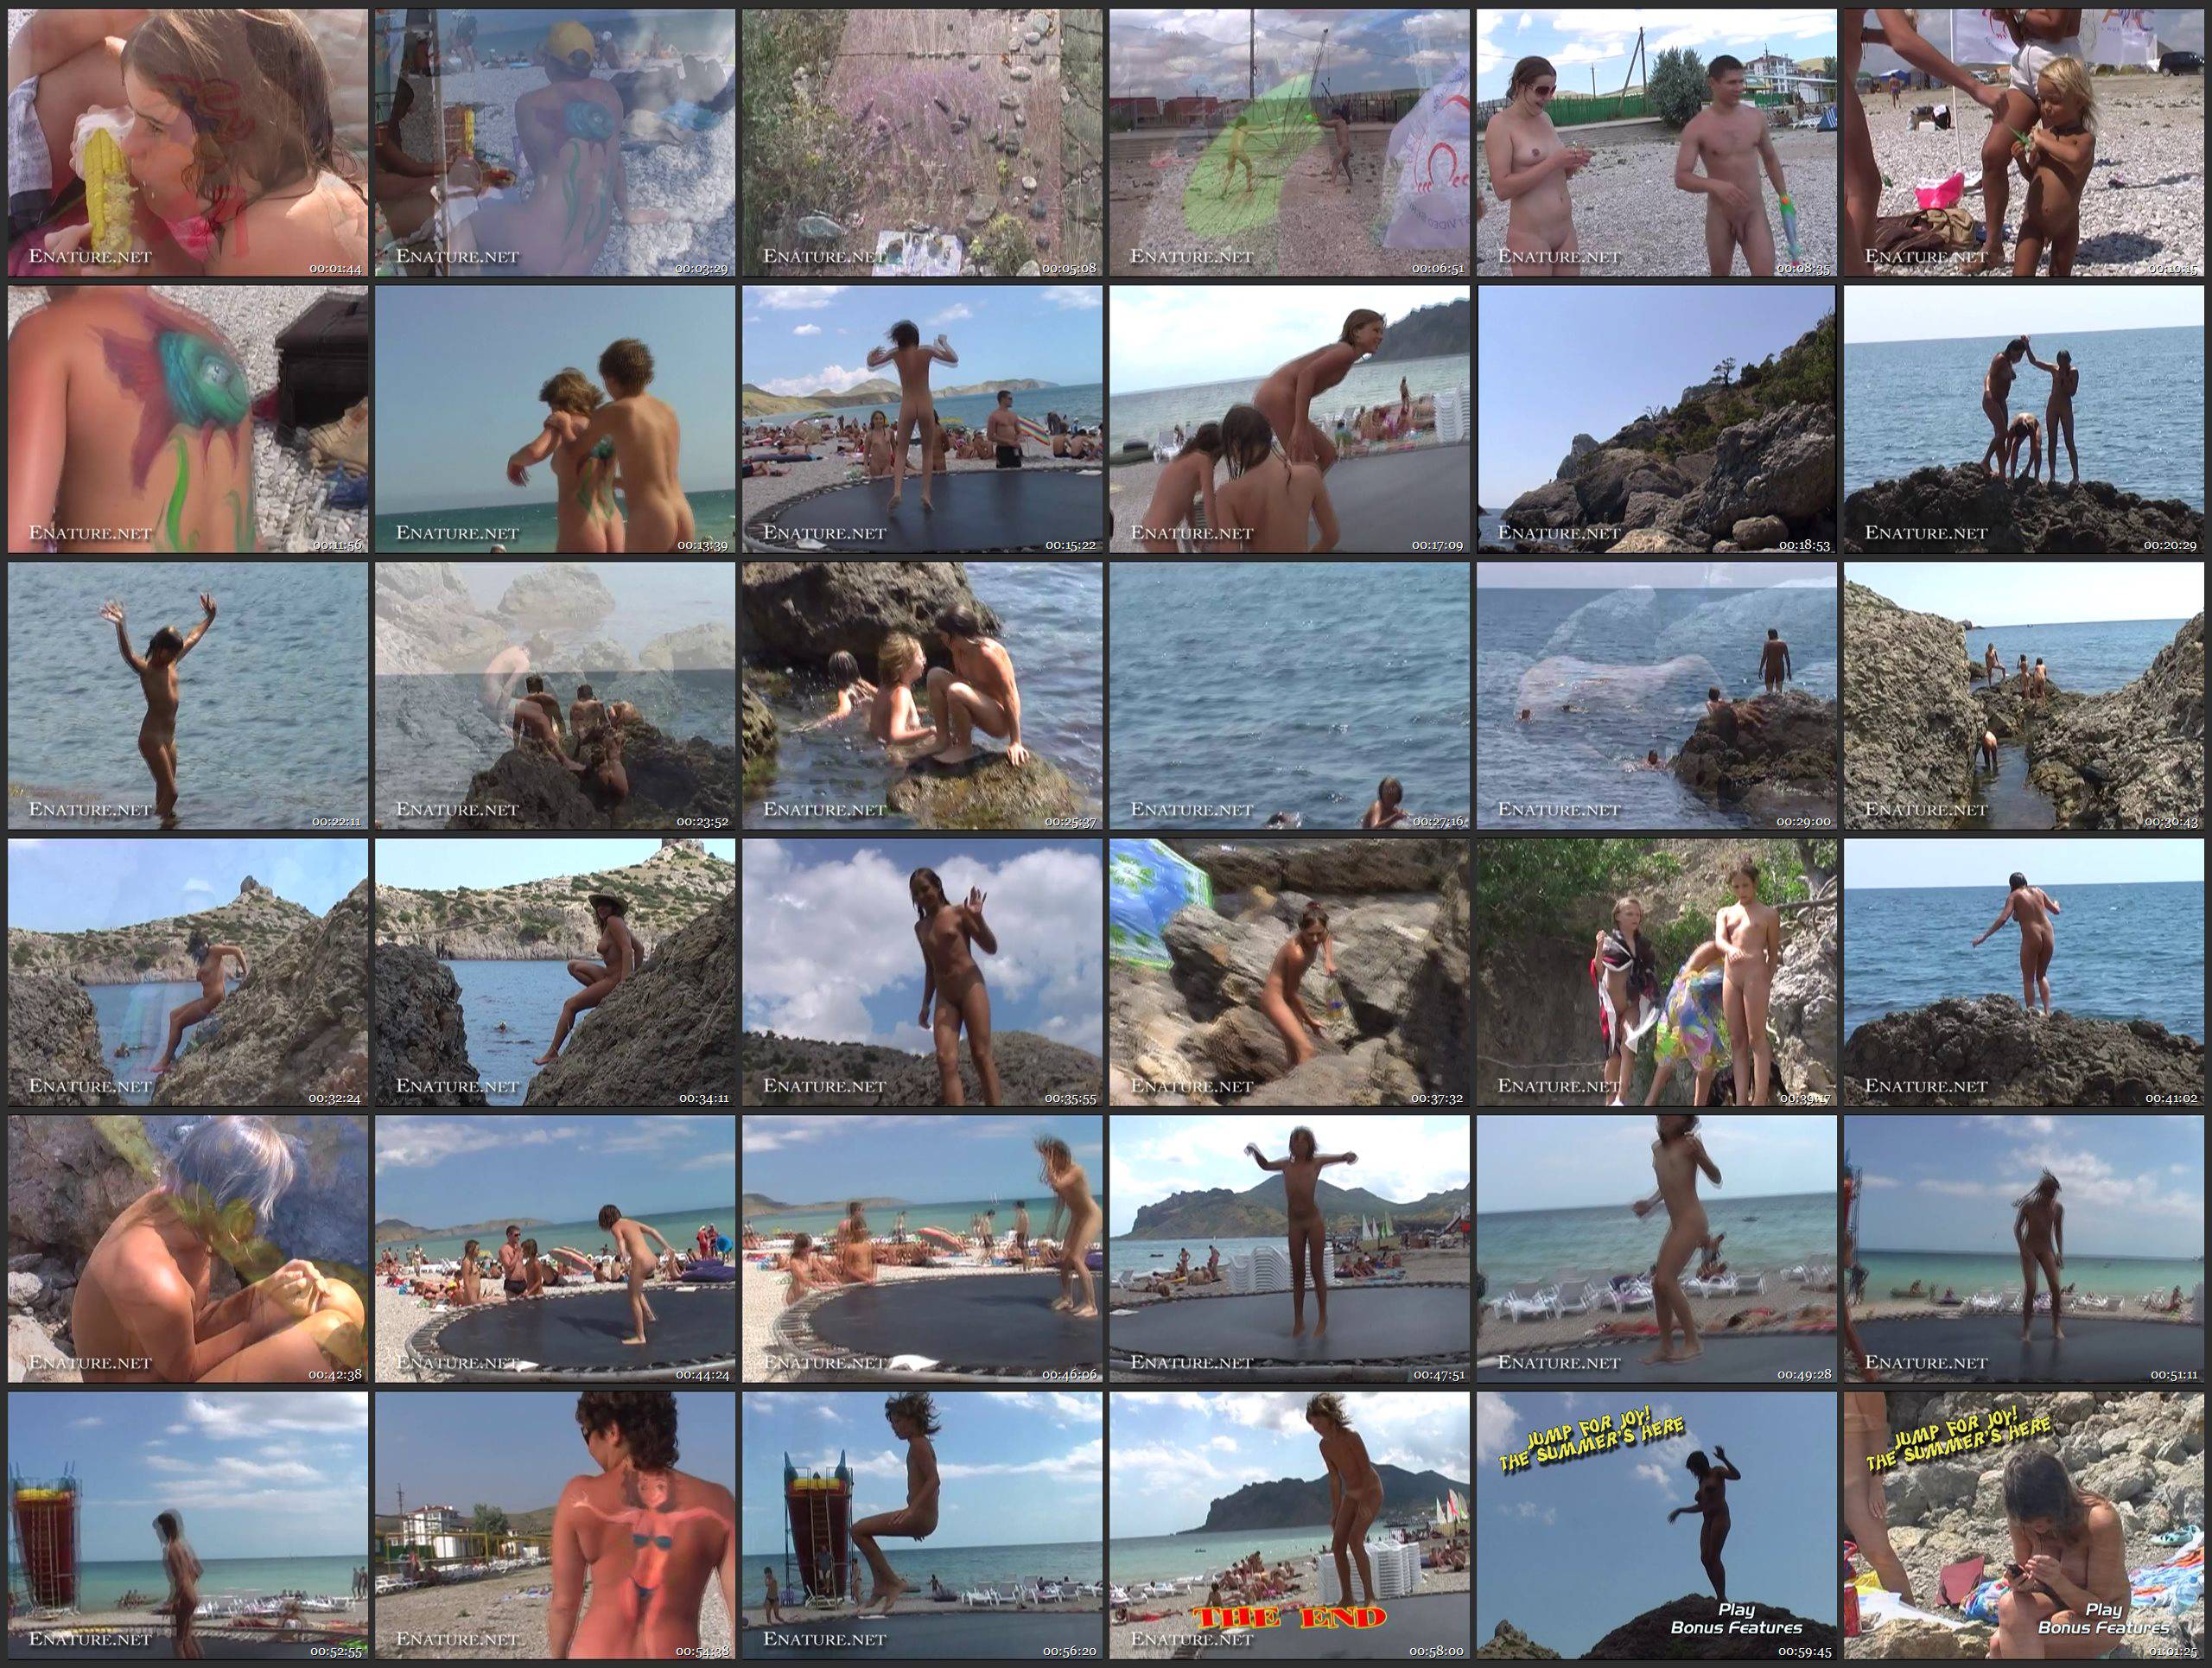 RussianBare and Enature Videos Jump for Joy! The Summer's Here - Thumbnails